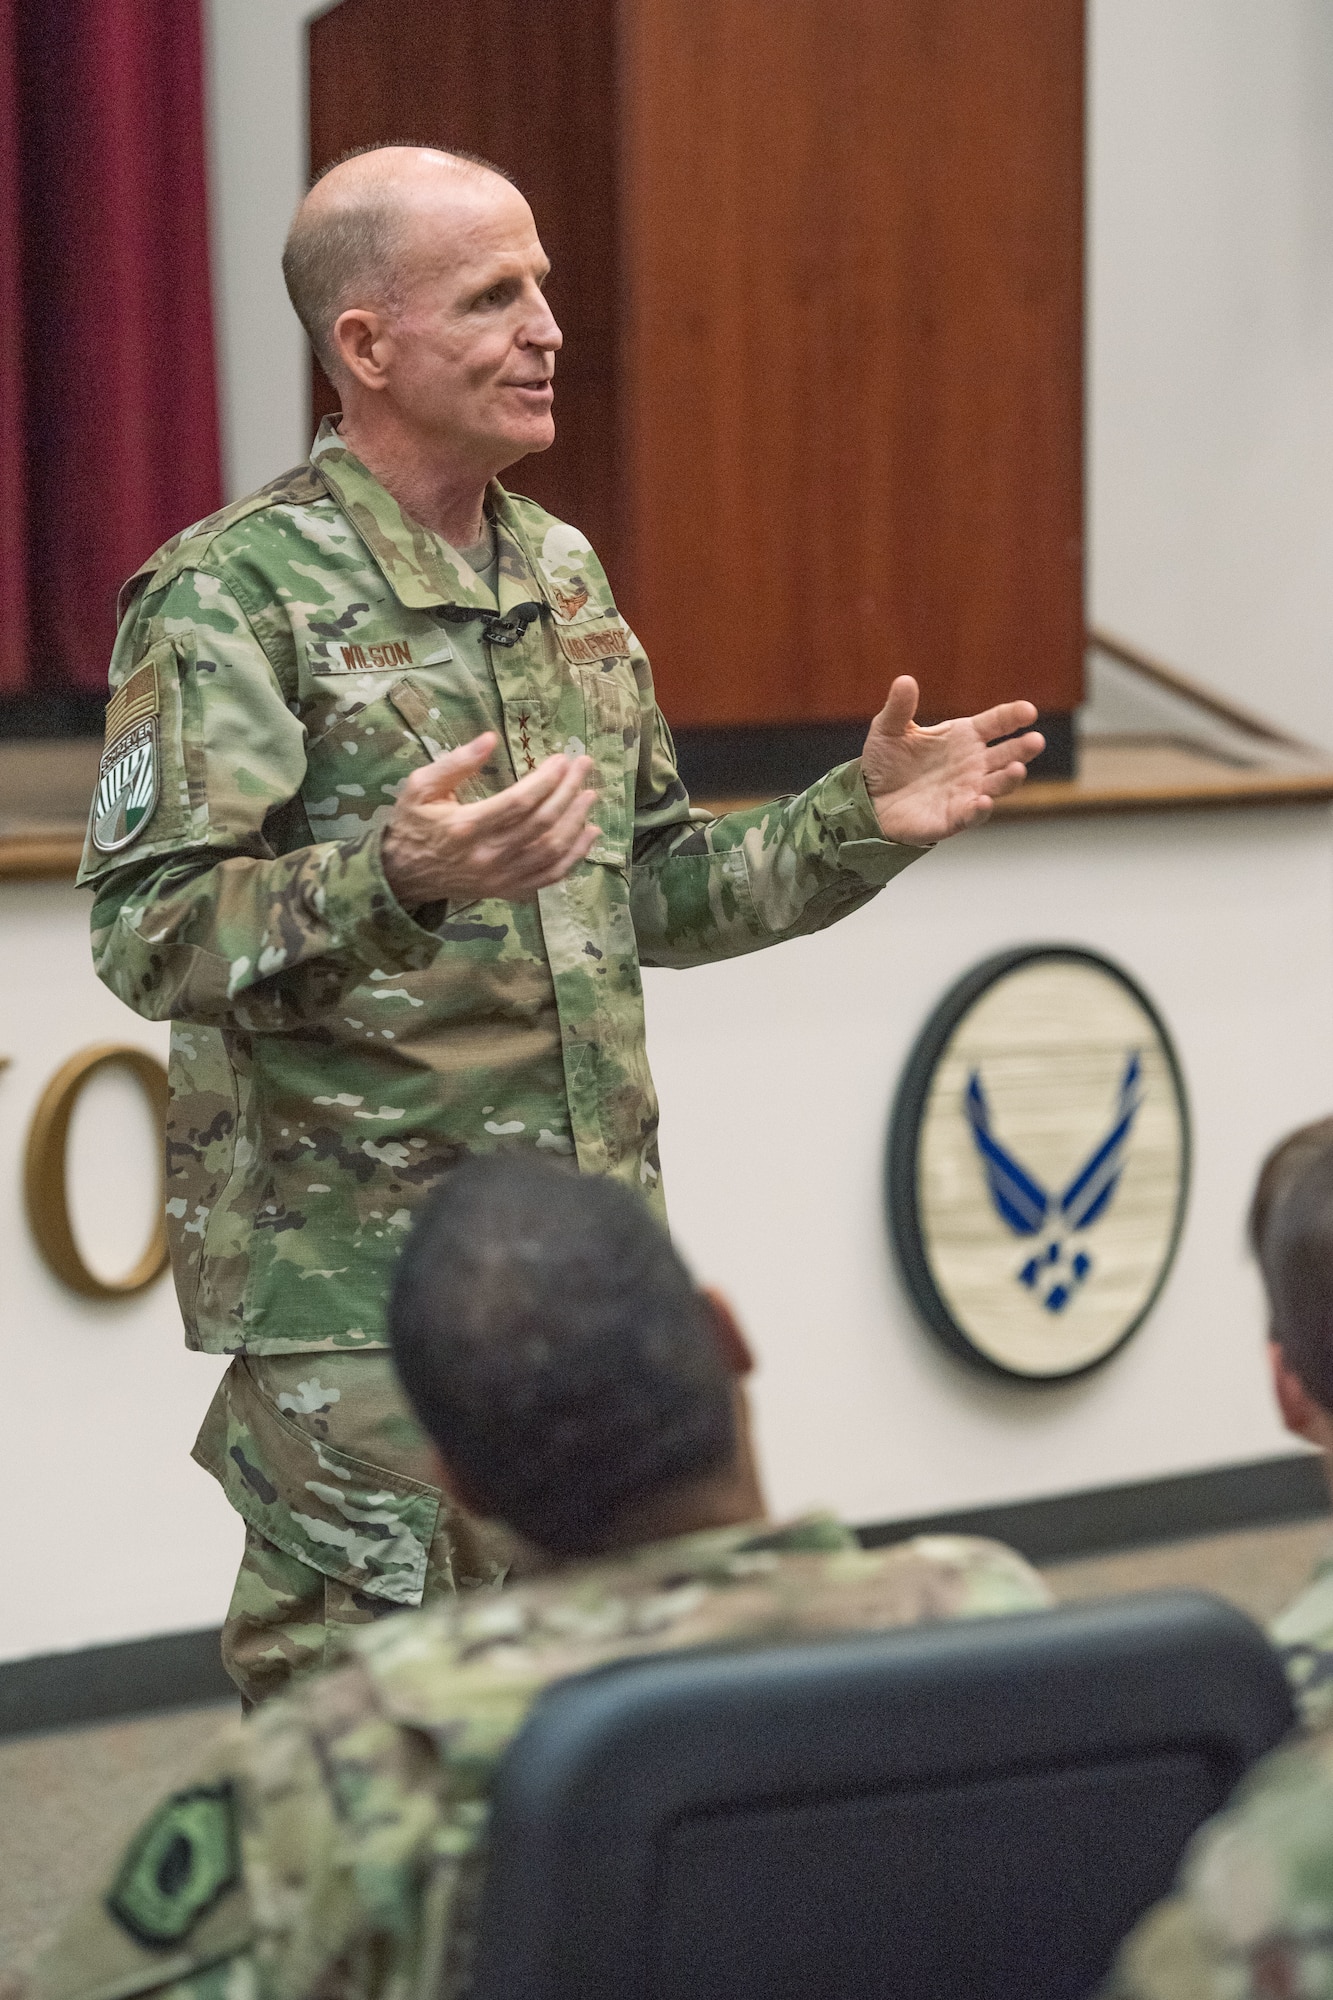 VCSAF speaks with OTS staff, instructors